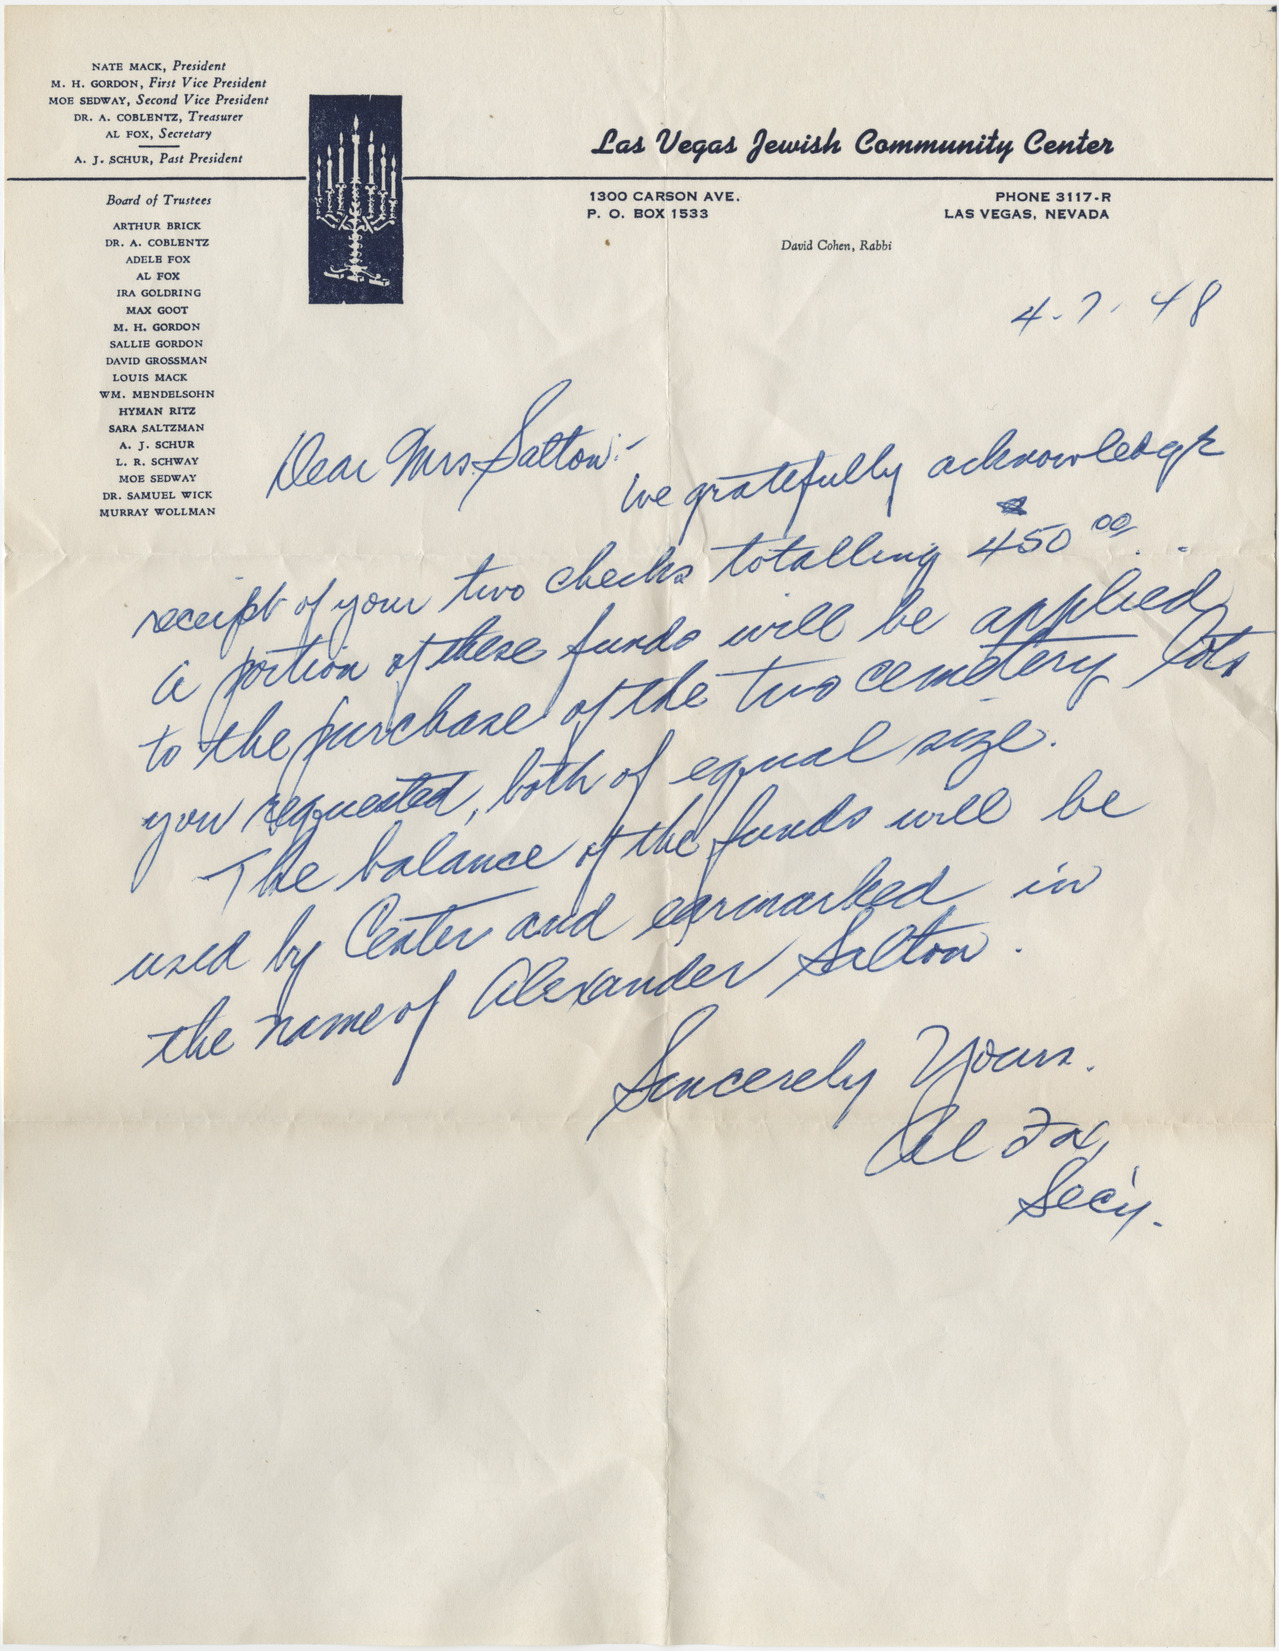 Letter from Al Fox to Charles Salton to confirm receipt of funds for the Las Vegas Jewish Community Center, March 7, 1948